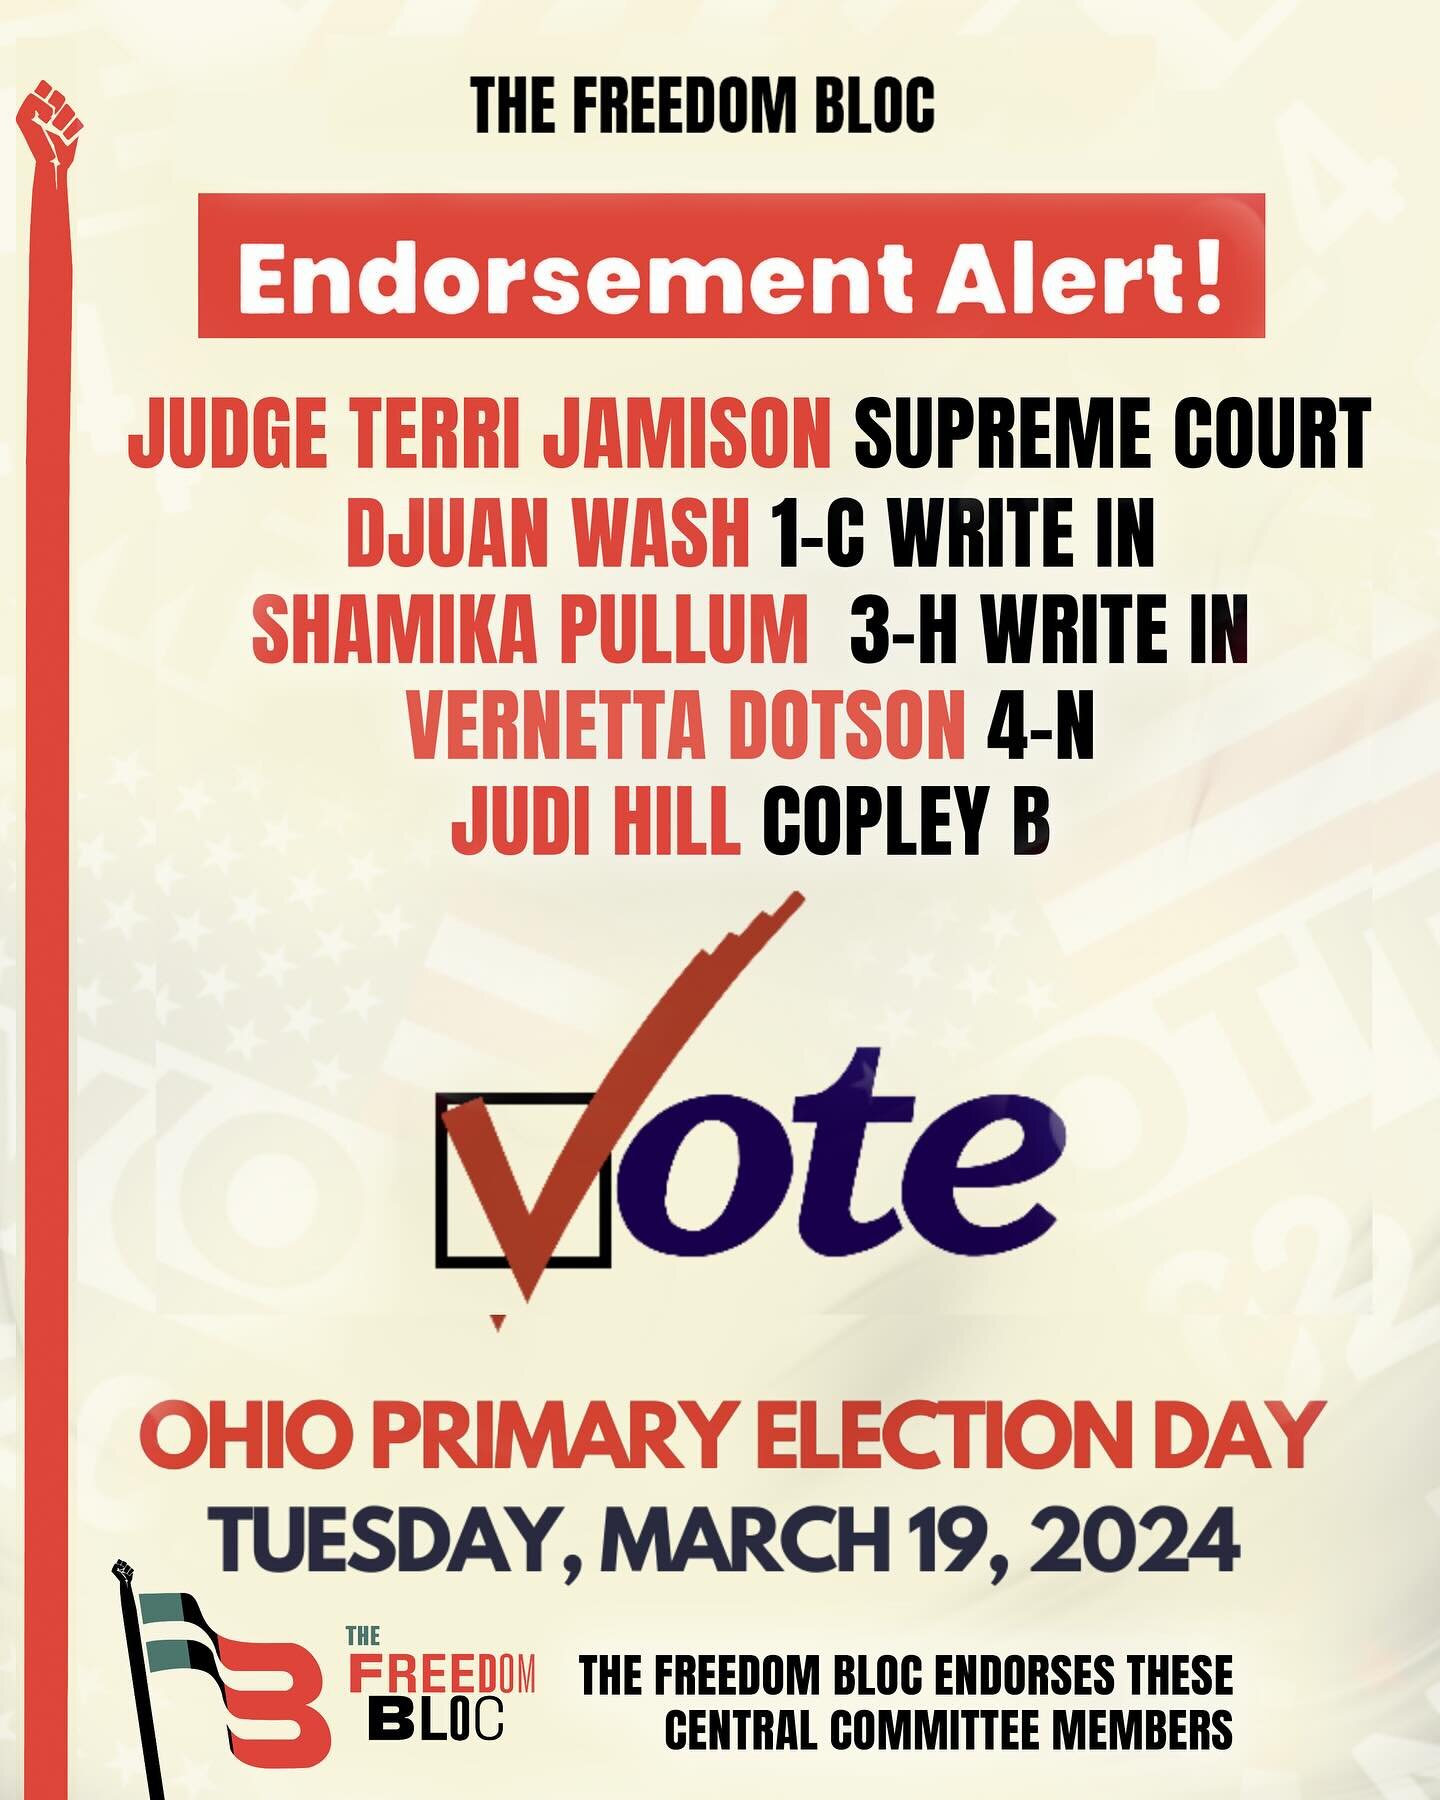 Election Day is Tuesday, March 19th!!!!!
The Freedom BLOC proudly endorses the following candidates for office: Judge Terri Jamison for Ohio Supreme Court, Djuan Wash for Central Committee Member in Akron Ward 1-C, Shamika Pullum in Akron Ward 3-H, V